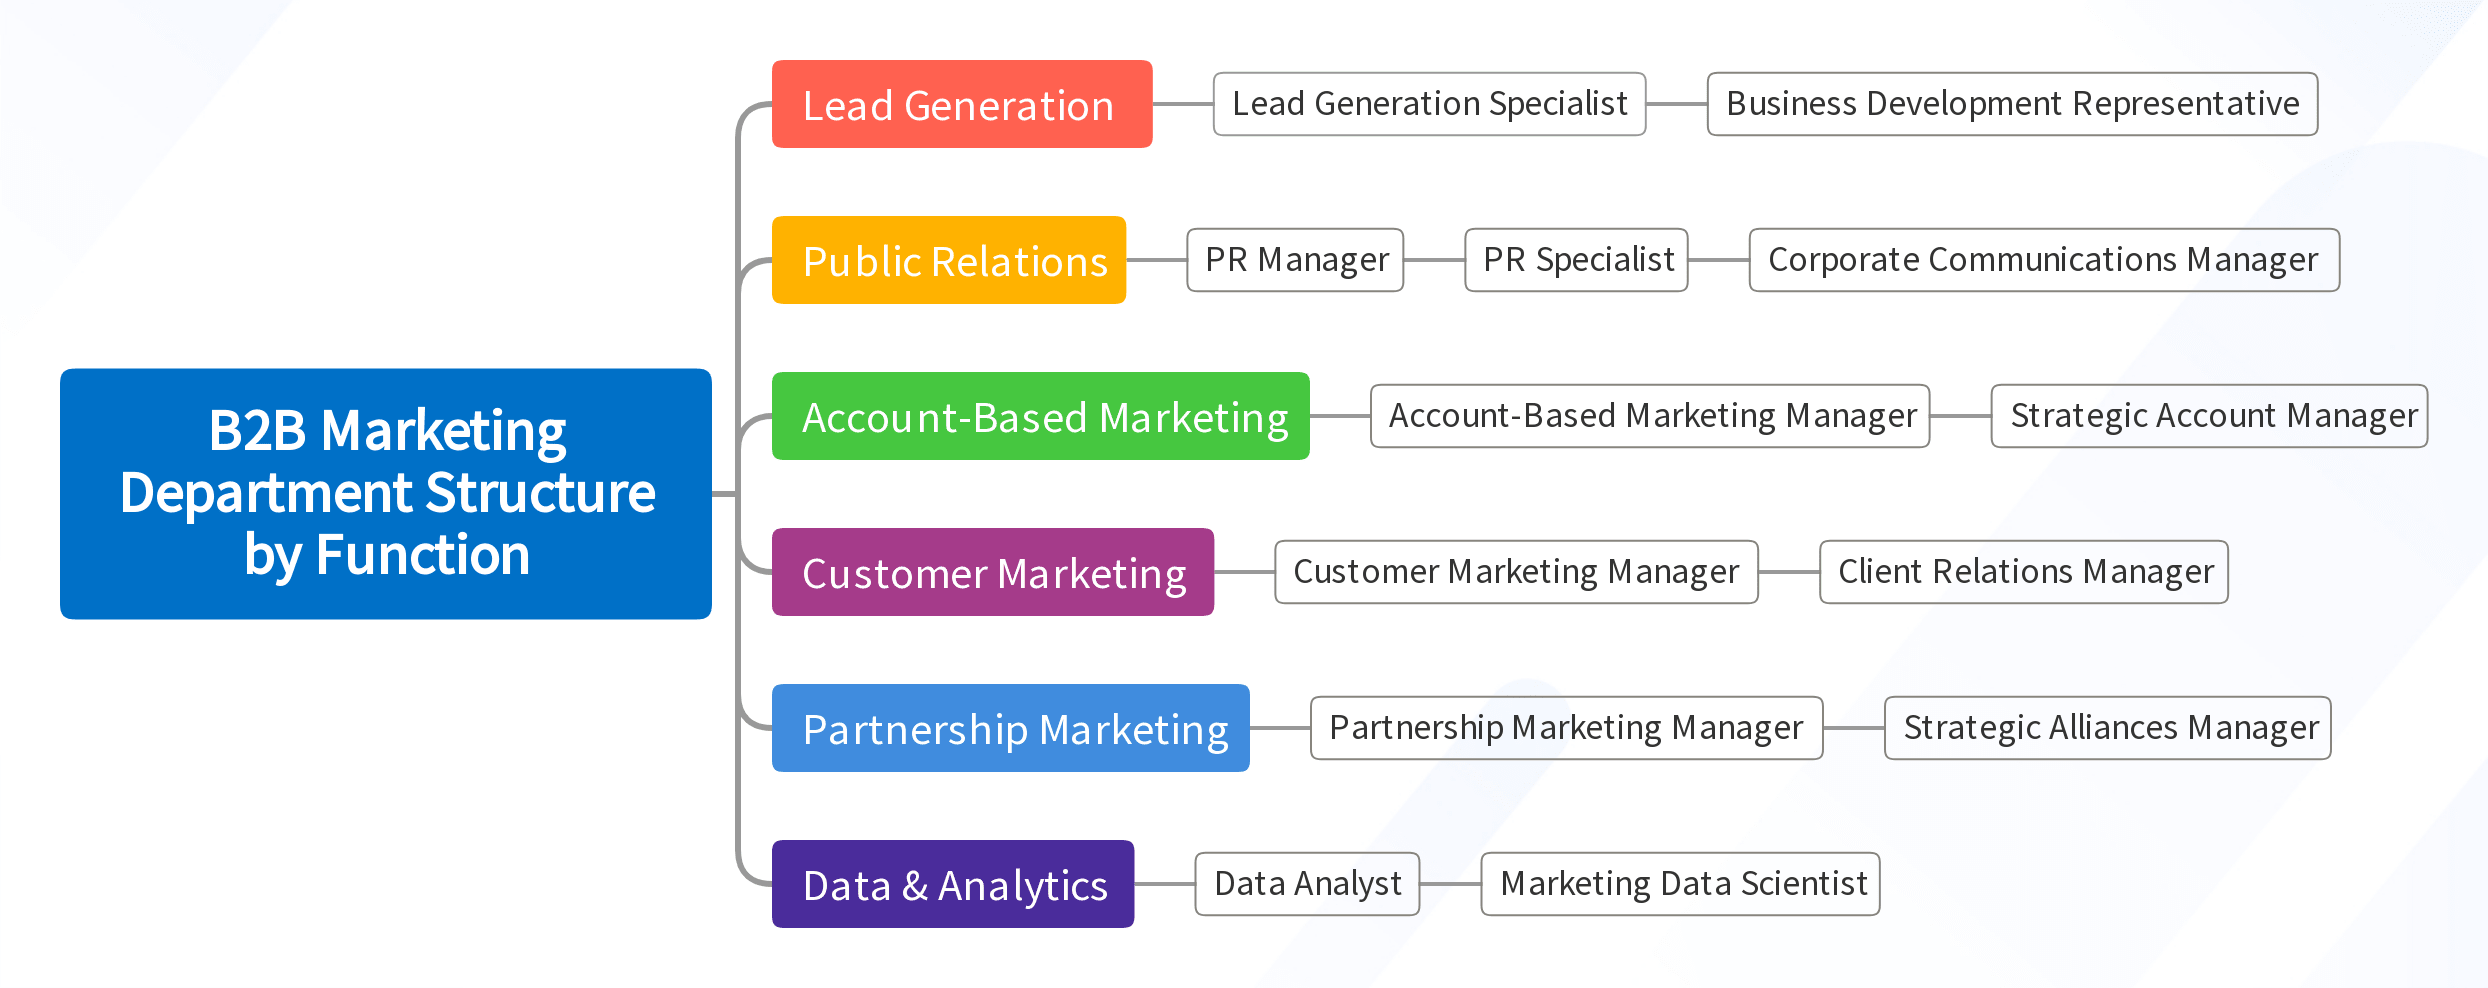 B2B Marketing Department Structure by Function